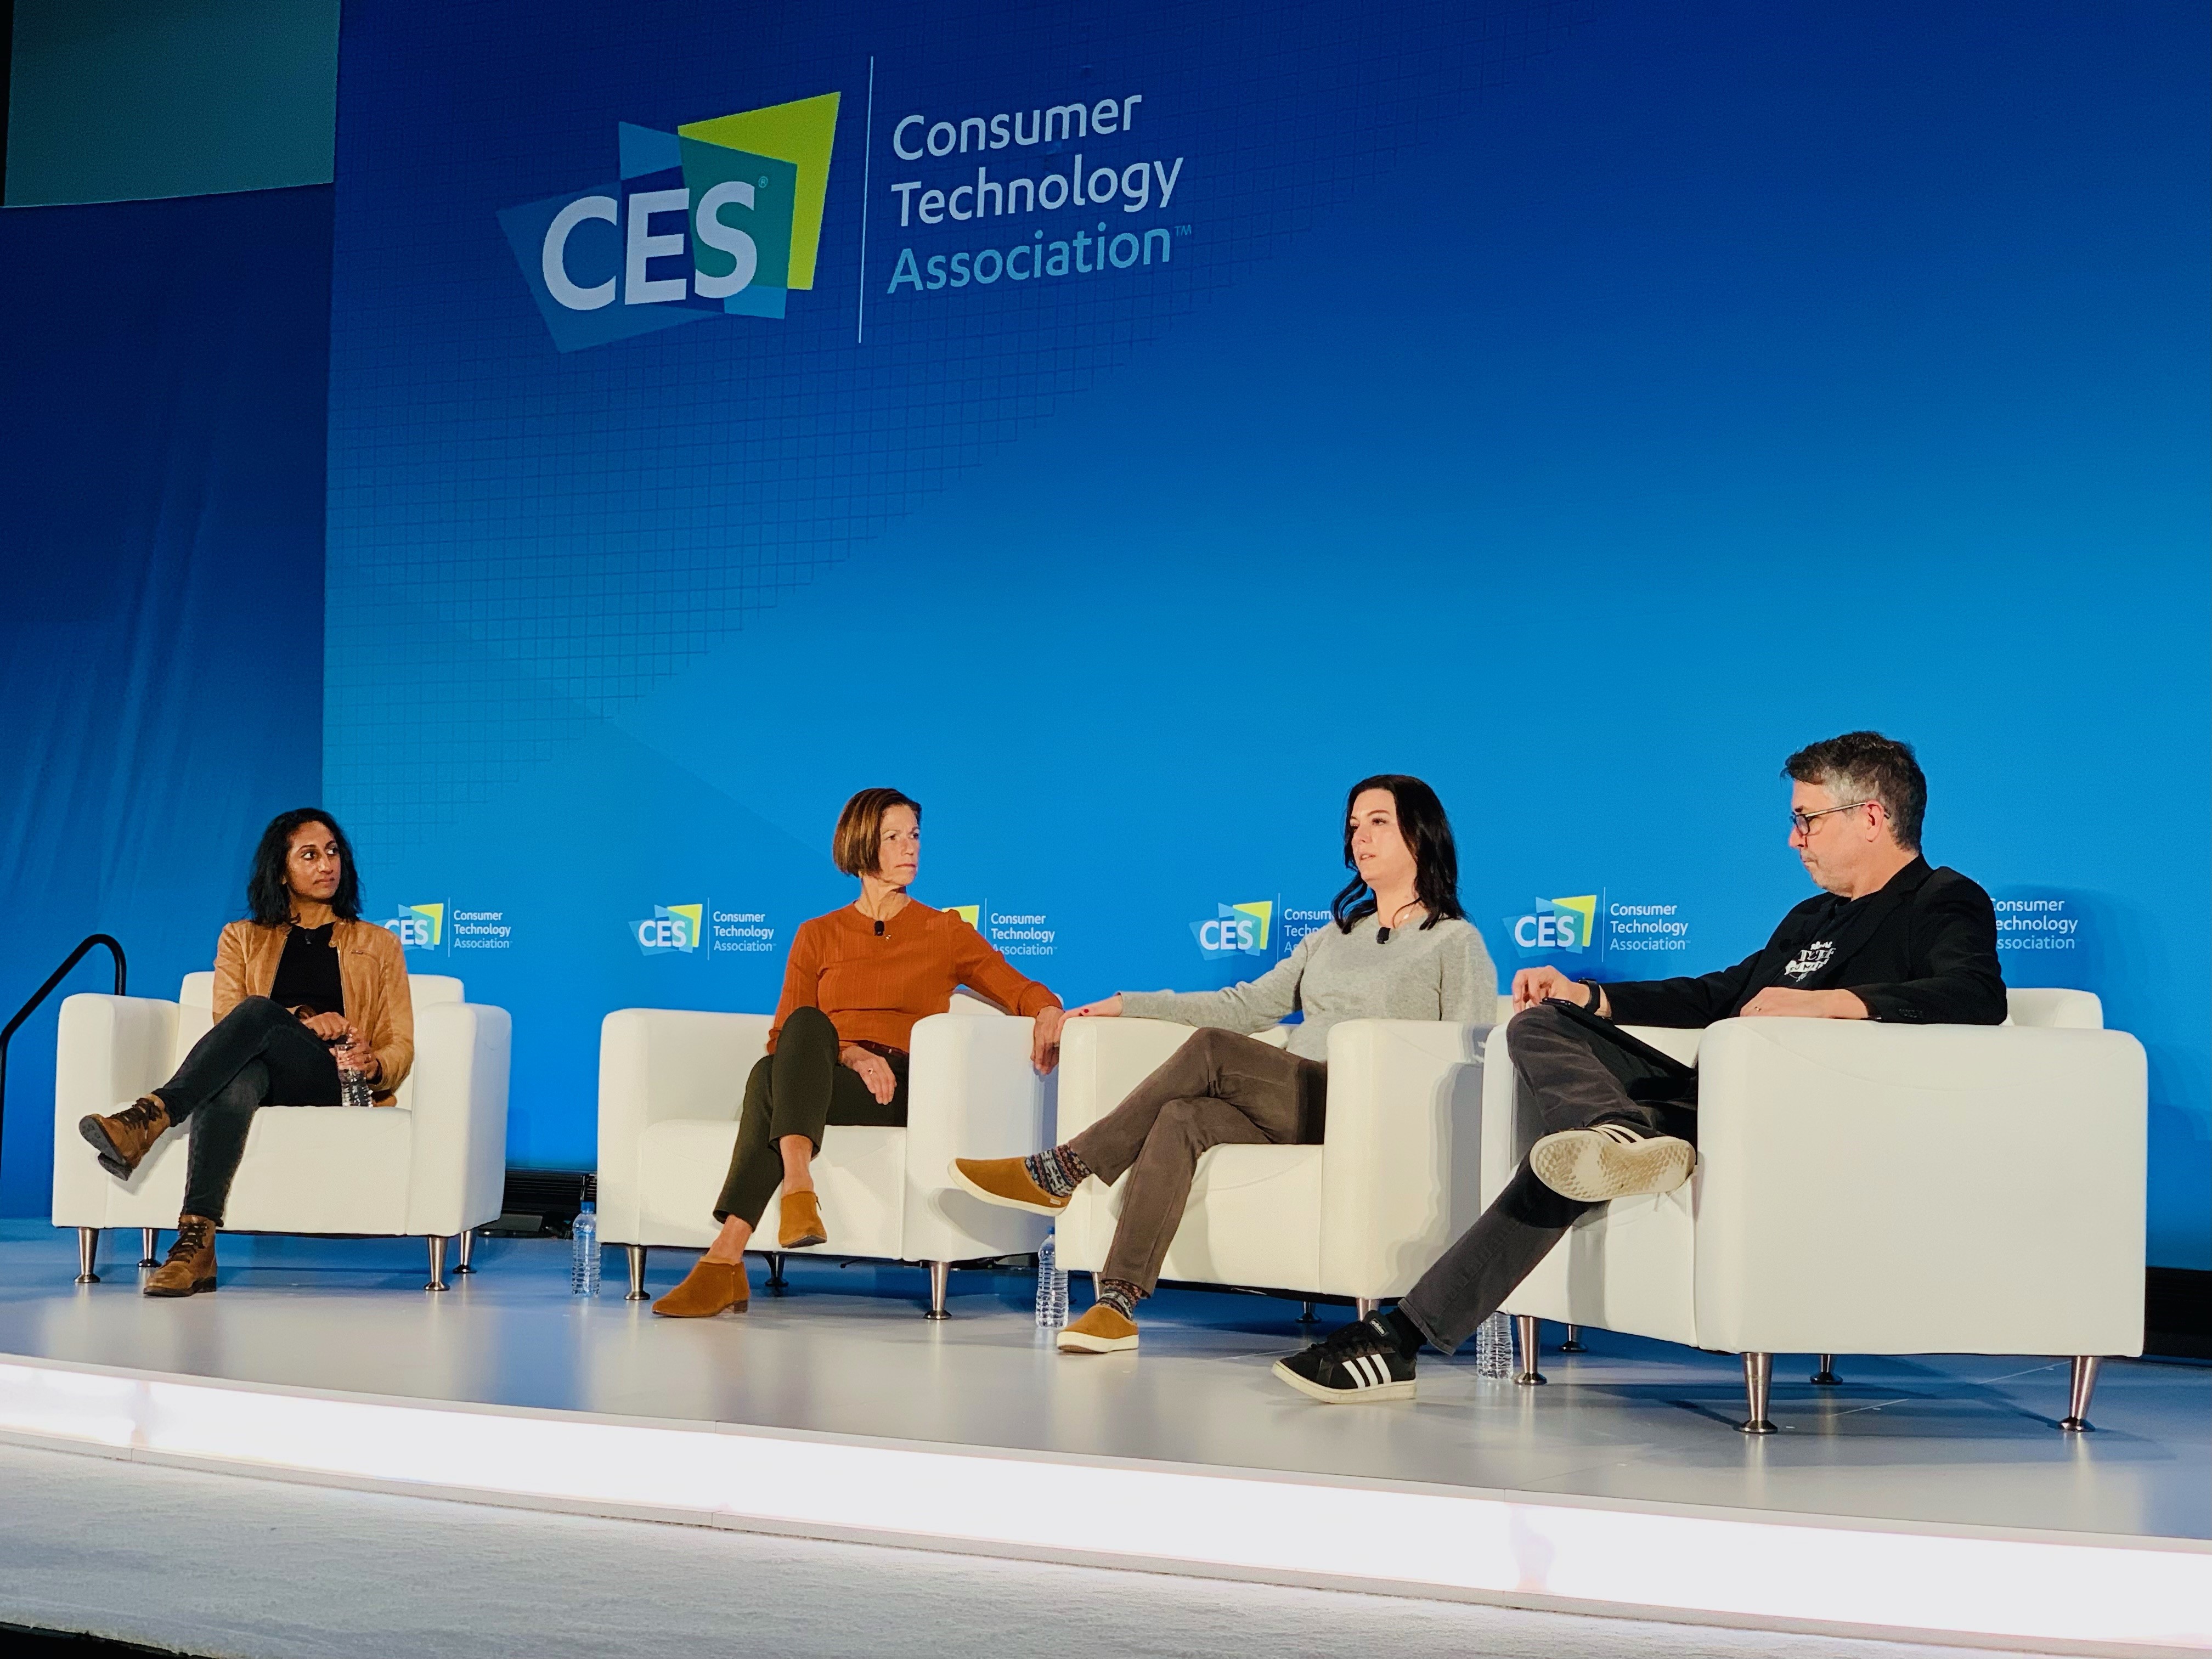 4 people on food tech panel at CES